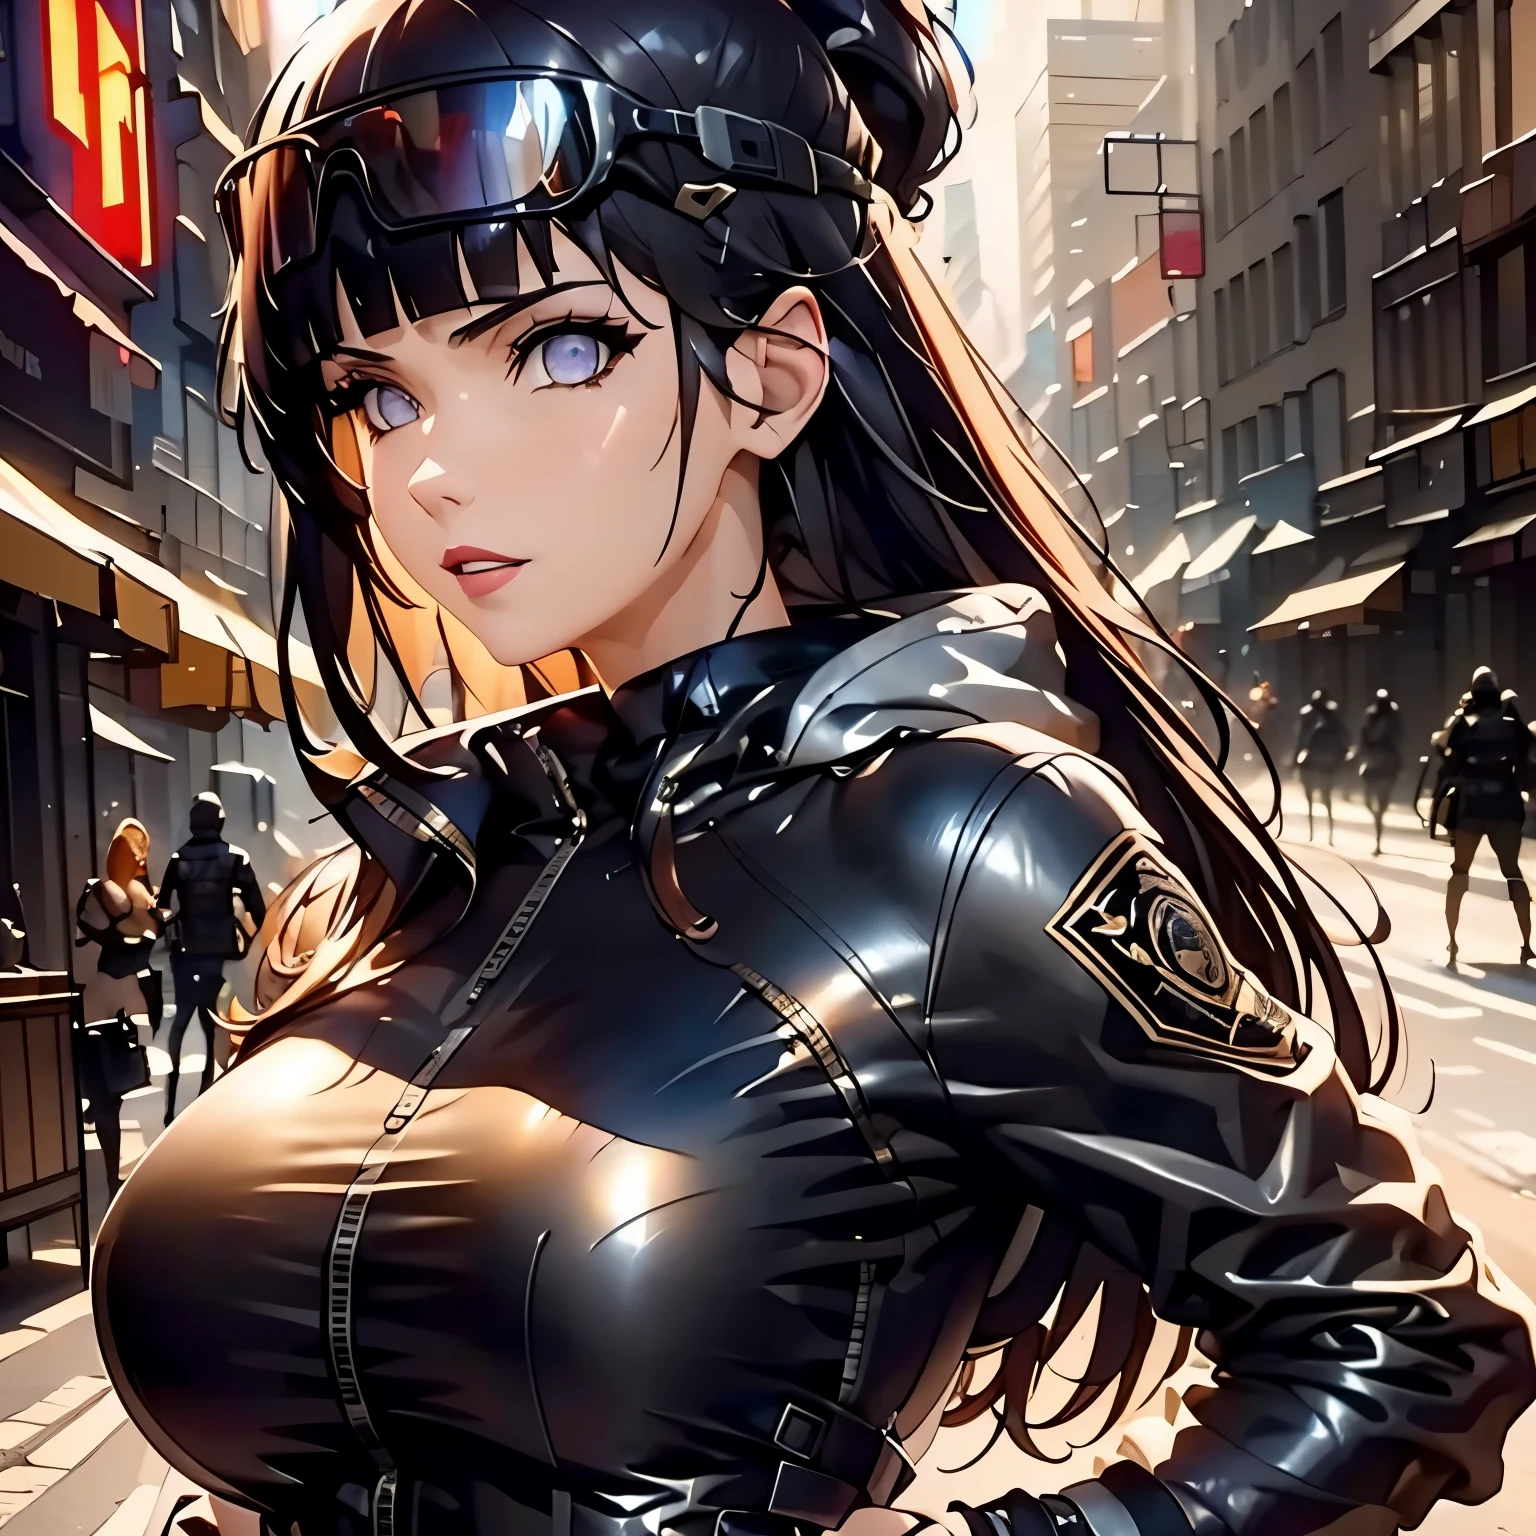 (masterpiece),(best quality:1.0), (ultra highres:1.0), detailed illustration, 8k, anime, 1girl hinata hyuga, beautiful anime girl from naruto shippuden, wearing a army special ops uniform, pretty face, detailed face, beautiful eyes, detailed eyes, bright red lips, red lipstick, beautiful stylish hair, highlights in hair, bangs anime style, best quality, vibrant, fullbody, cariying Sniper Rifle 